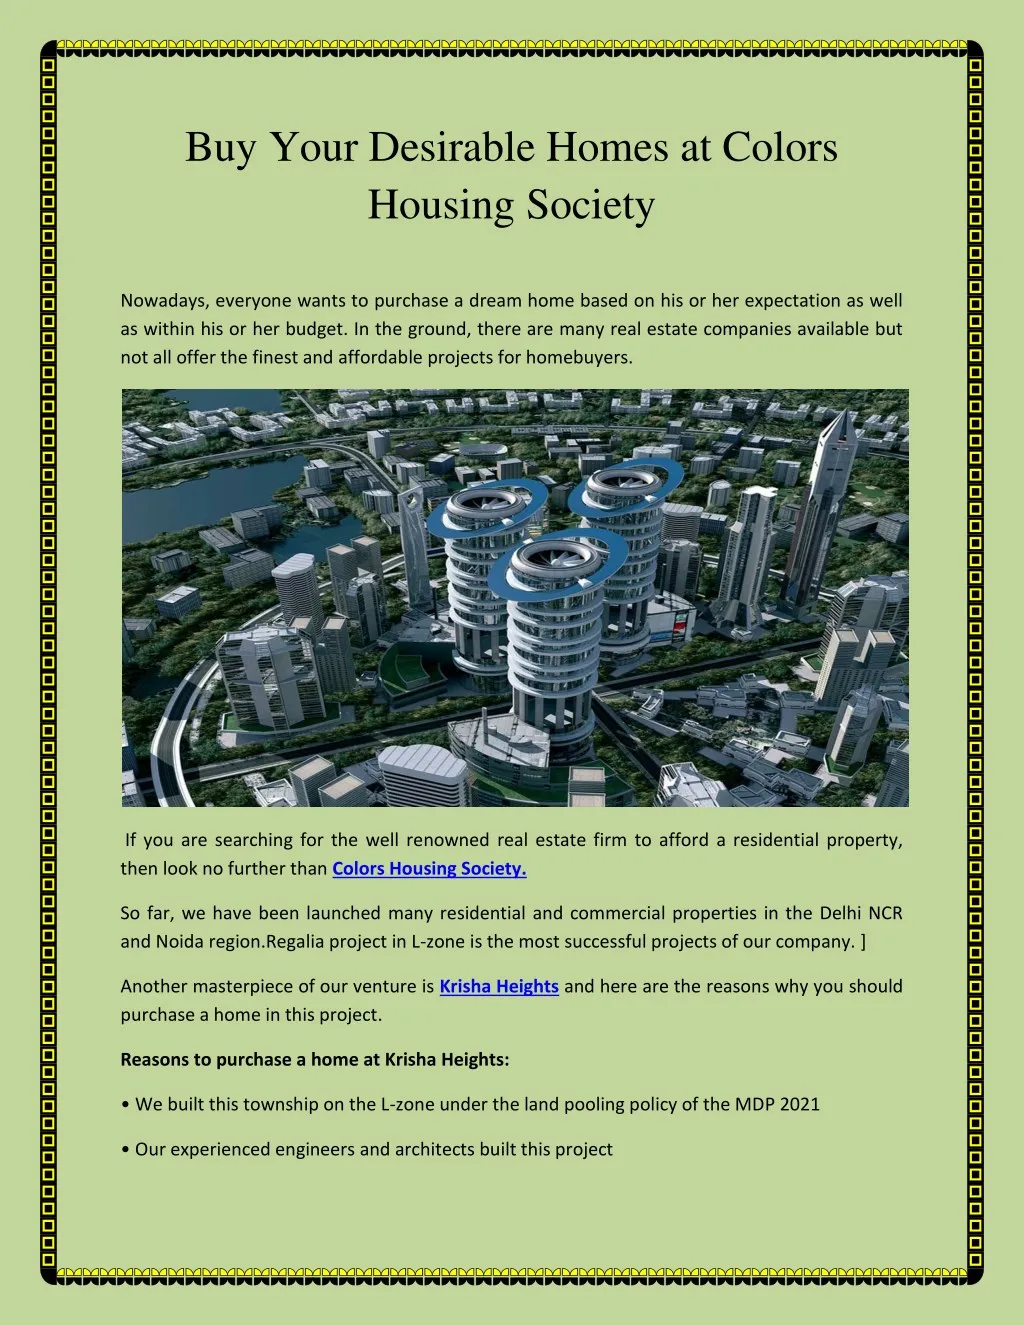 buy your desirable homes at colors housing society